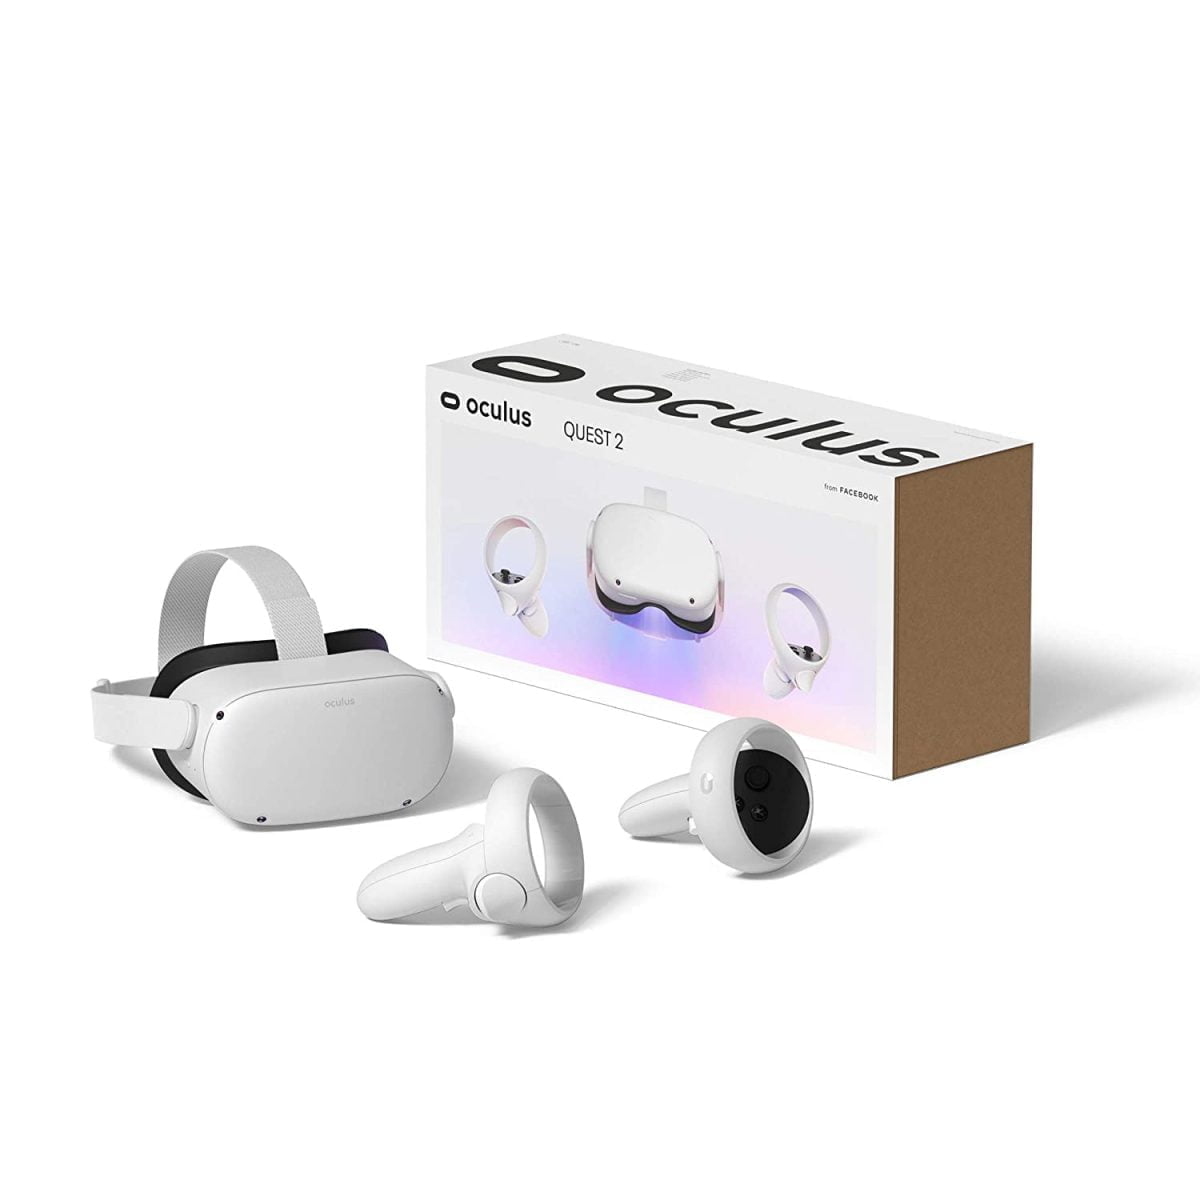 614Rzogtxl. Sl1500 Oculus &Lt;H1&Gt;Meta Quest 2 128 Gb Advanced All-In-One Virtual Reality Headset&Lt;/H1&Gt; Https://Youtu.be/Atvgl9Wojsm &Lt;Ul Class=&Quot;A-Unordered-List A-Vertical A-Spacing-Mini&Quot;&Gt; &Lt;Li&Gt;&Lt;Span Class=&Quot;A-List-Item&Quot;&Gt;Voltage: 100-240 V&Lt;/Span&Gt;&Lt;/Li&Gt; &Lt;Li&Gt;&Lt;Span Class=&Quot;A-List-Item&Quot;&Gt;Next-Level Hardware - Make Every Move Count With A Blazing-Fast Processor And Our Highest-Resolution Display&Lt;/Span&Gt;&Lt;/Li&Gt; &Lt;Li&Gt;&Lt;Span Class=&Quot;A-List-Item&Quot;&Gt;All-In-One Gaming - With Backward Compatibility, You Can Explore New Titles And Old Favorites In The Expansive Quest Content Library&Lt;/Span&Gt;&Lt;/Li&Gt; &Lt;Li&Gt;&Lt;Span Class=&Quot;A-List-Item&Quot;&Gt;Immersive Entertainment - Get The Best Seat In The House To Live Concerts, Groundbreaking Films, Exclusive Events And More&Lt;/Span&Gt;&Lt;/Li&Gt; &Lt;Li&Gt;&Lt;Span Class=&Quot;A-List-Item&Quot;&Gt;Easy Setup - Just Open The Box, Set Up With The Smartphone App And Jump Into Vr. No Pc Or Console Needed. Requires Wireless Internet Access And The Oculus App (Free Download) To Set Up Device Premium Display - Catch Every Detail With A Stunning Display That Features 50% More Pixels Than The Original Quest Ultimate Control - Redesigned Oculus Touch Controllers Transport Your Movements Directly Into Vr With Intuitive Controls Pc Vr Compatible - Step Into Incredible Oculus Rift Titles By Connecting An Oculus Link Cable To A Compatible Gaming Pc. Oculus Link Cable Sold Separately 3D Cinematic Sound - Hear In All Directions With Built-In Speakers That Deliver Cinematic 3D Positional Audio&Lt;/Span&Gt;&Lt;/Li&Gt; &Lt;/Ul&Gt; &Nbsp; Meta Quest 2 Meta Quest 2 128 Gb Advanced All-In-One Virtual Reality Headset